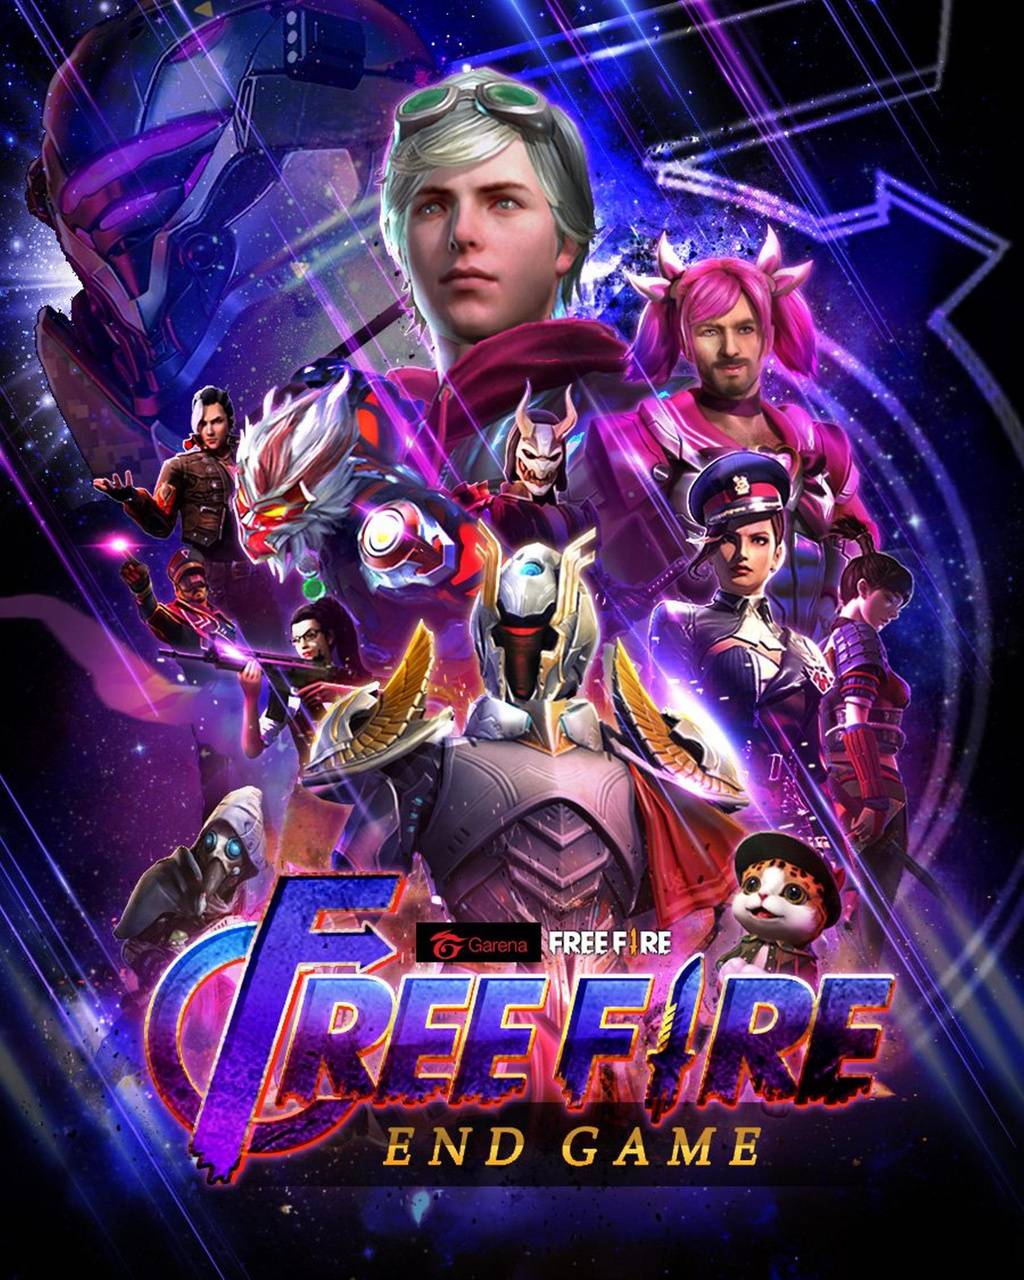 Free Fire End Game wallpaper